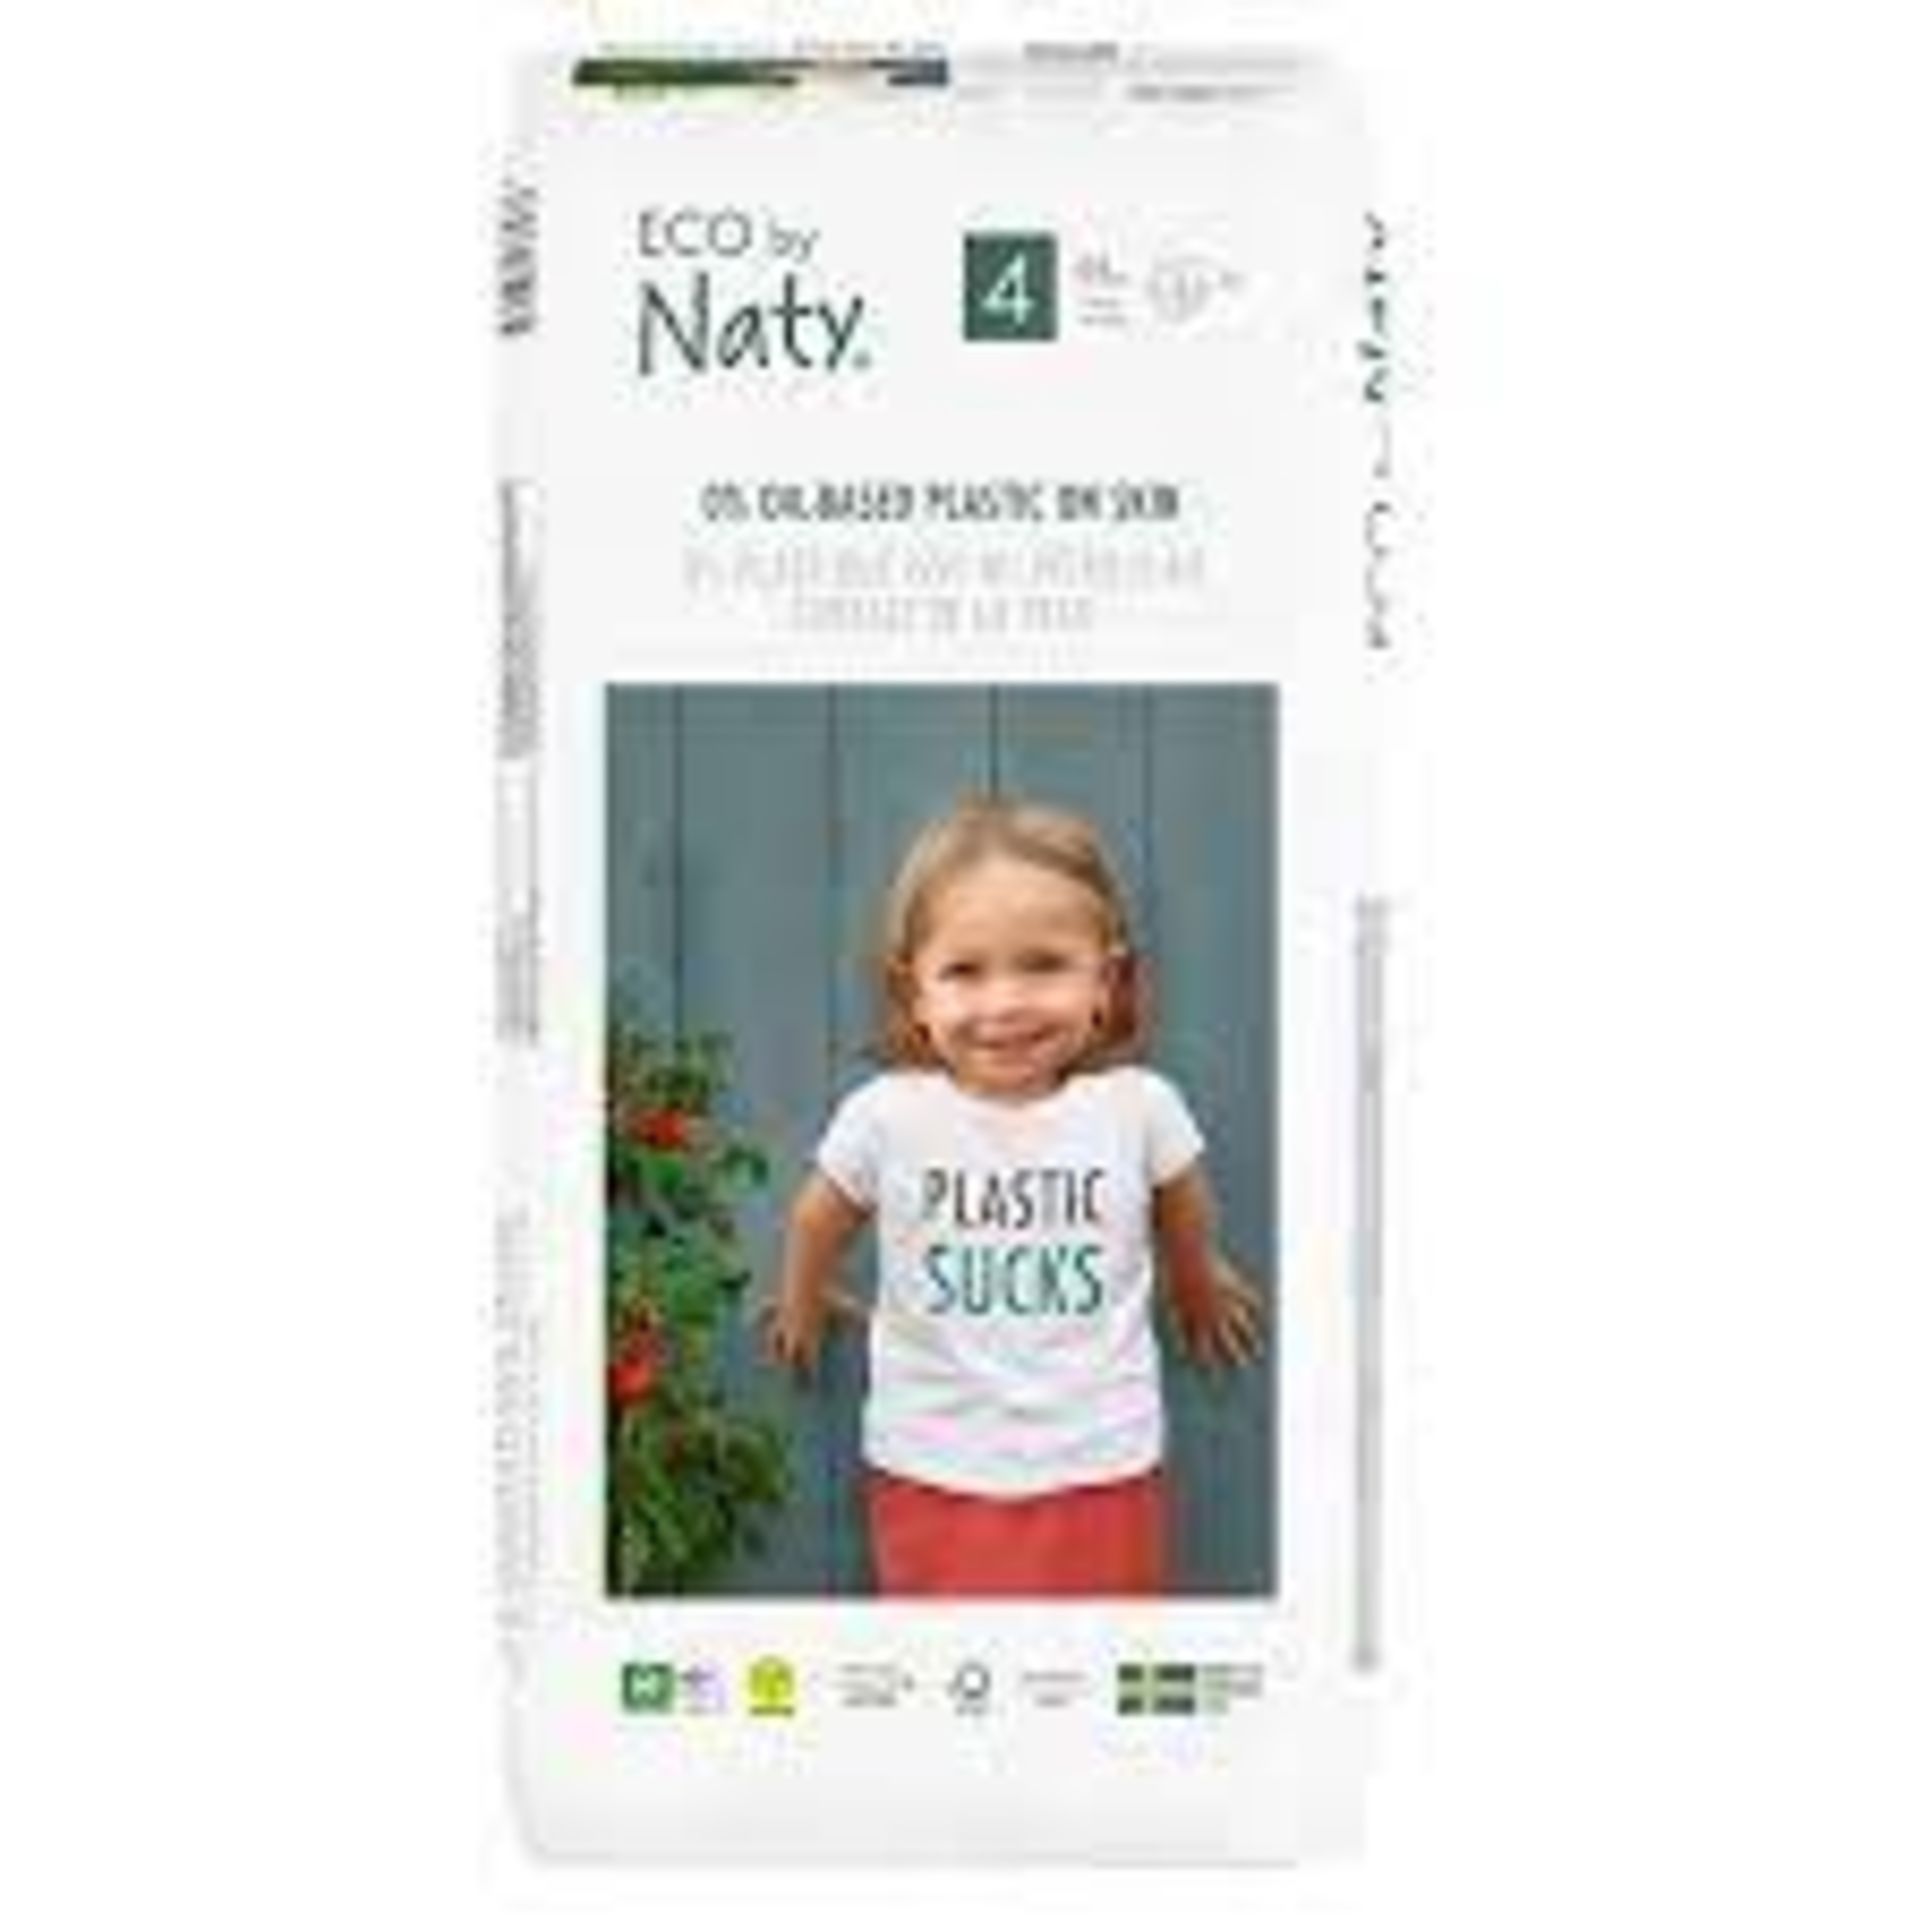 RRP £1800 (Count 513 ) Spw21B9820N Eco By Naty Baby Nappies, Size 4, 10 Ct, Plant-Based With 0%